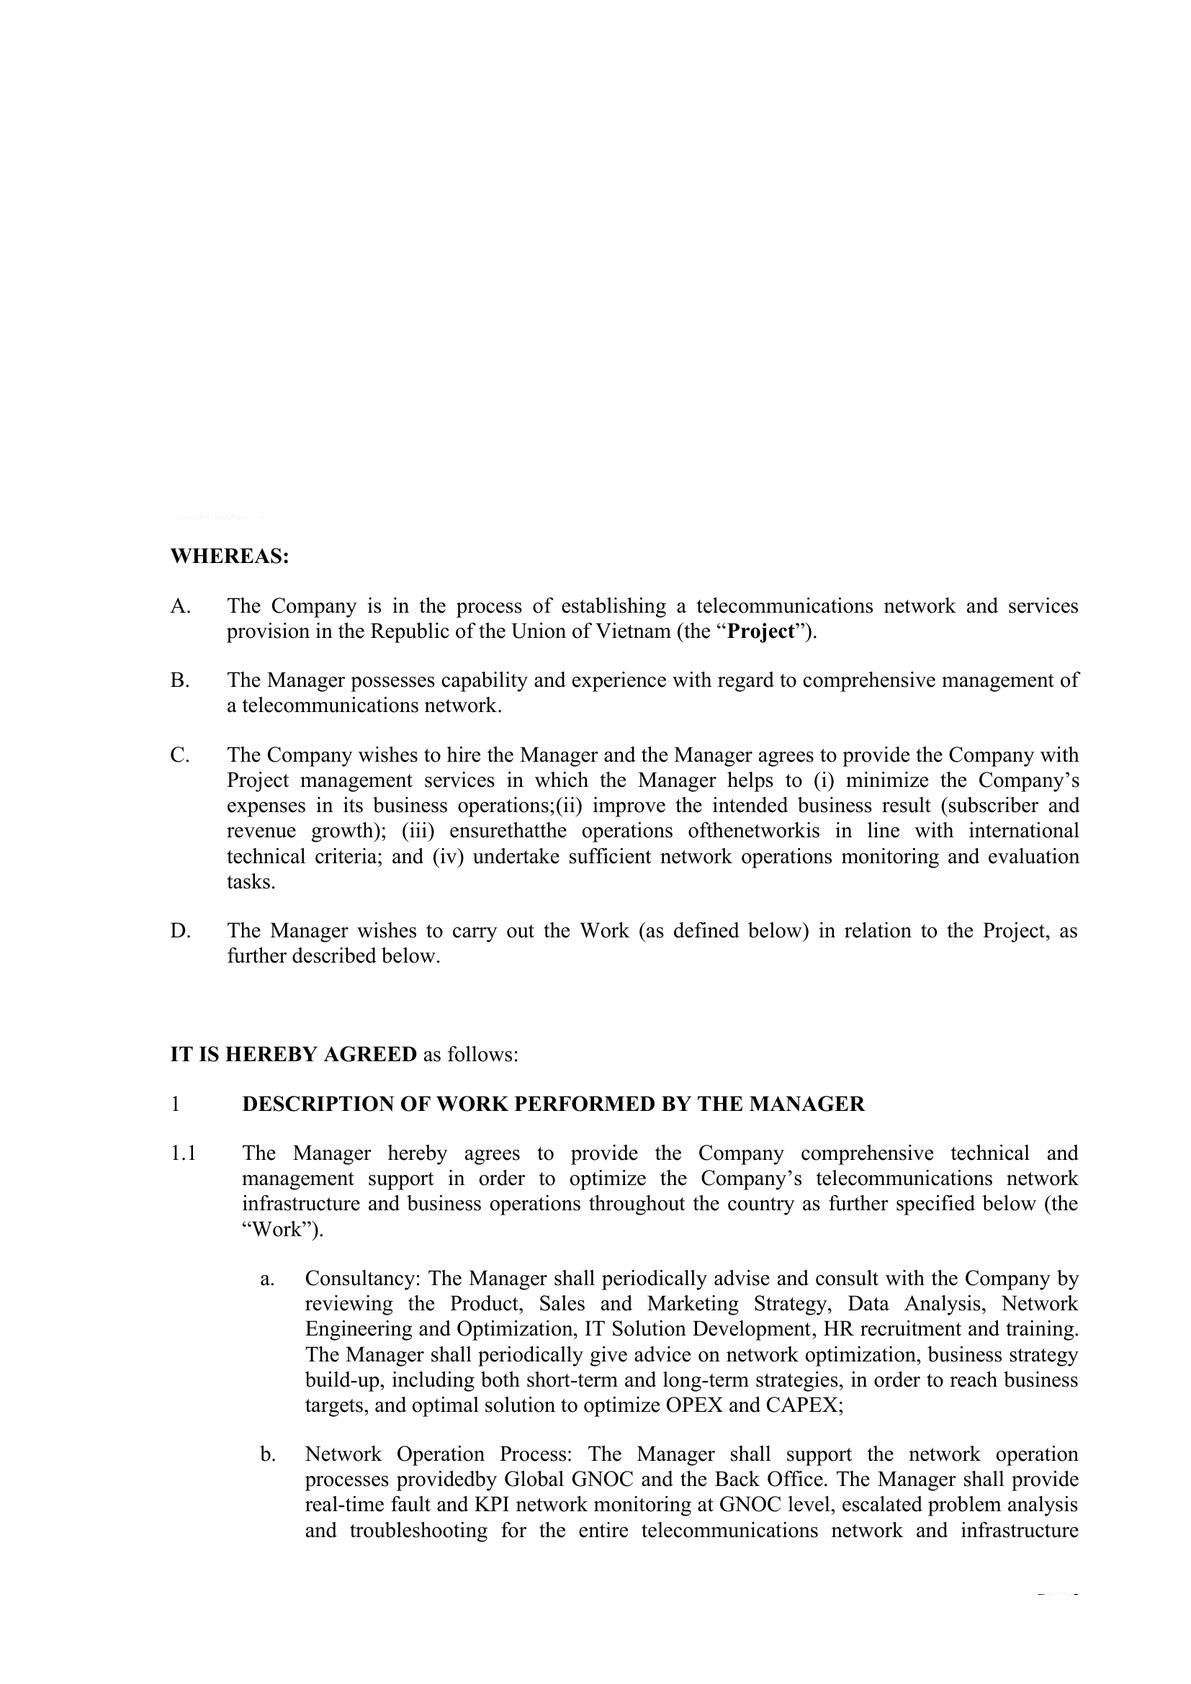 Technical and Management Service Agreement in Telecom -1